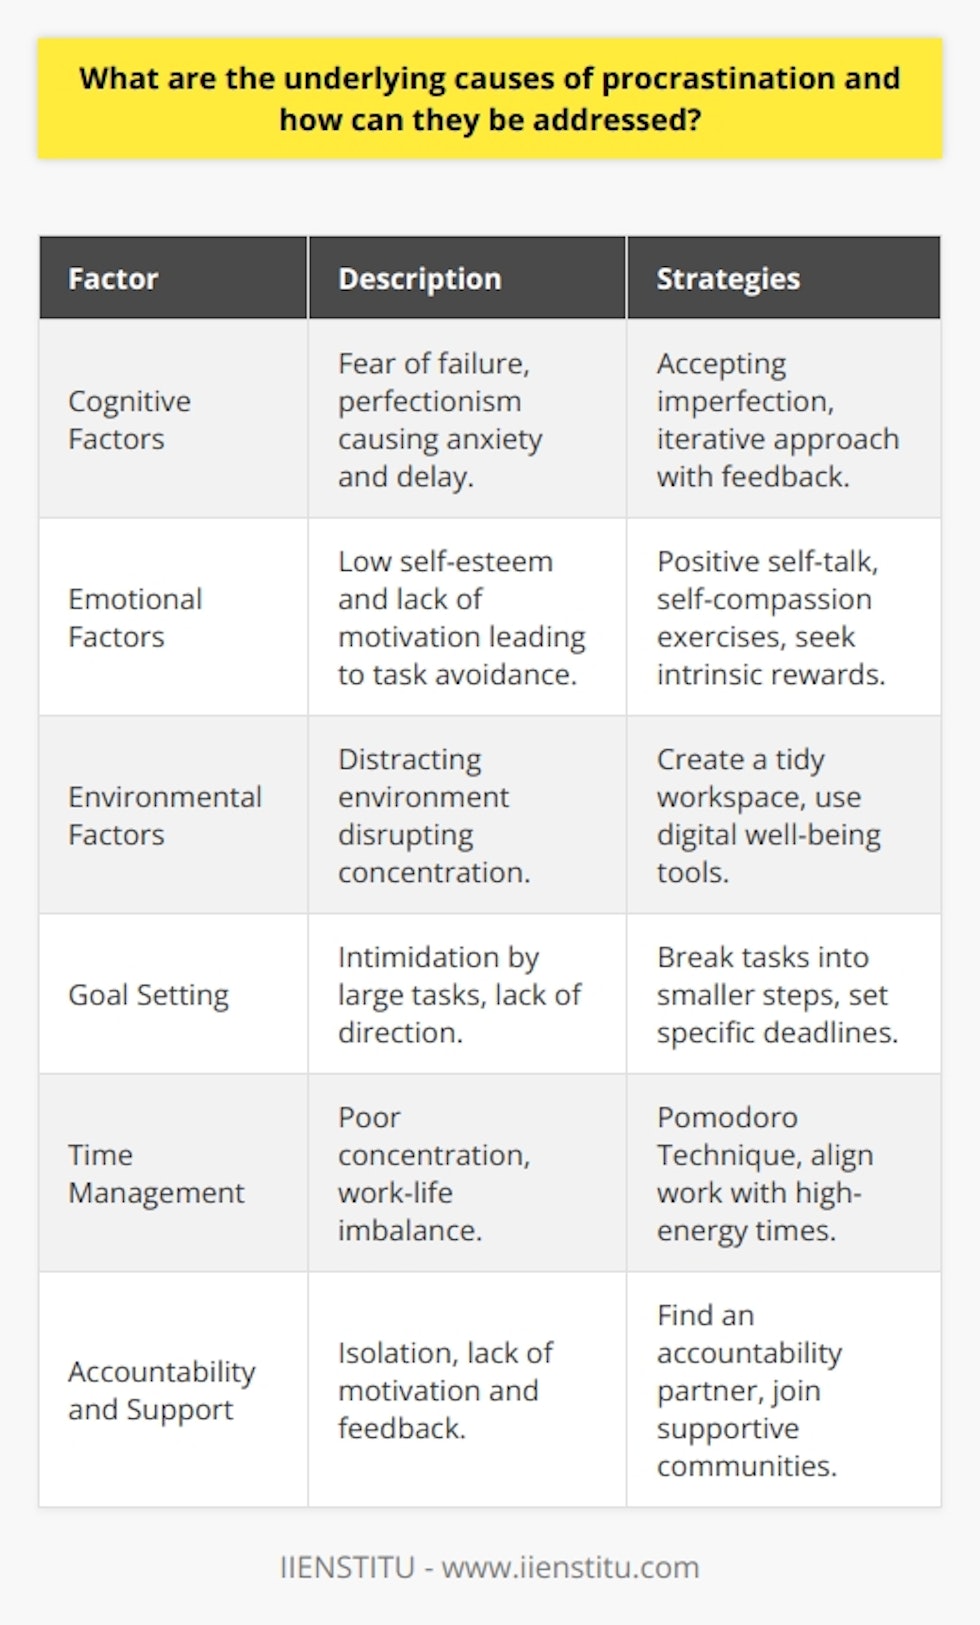 Procrastination, a pervasive issue affecting many individuals' productivity and well-being, can be attributed to various factors. Understanding these factors and employing strategies to mitigate their effects can significantly reduce the inclination to procrastinate.**Cognitive Factors**Cognitive factors contribute significantly to procrastination. The fear of failure and perfectionism are two primary psychological hurdles. Individuals who fear failure may delay starting tasks as a coping mechanism to avoid the risk of underperforming. Conversely, perfectionists may postpone tasks due to an internal pressure to deliver impeccable results, creating a continuous cycle of anxiety and delay. Combatting these cognitive distortions requires a conscious shift towards accepting that imperfection is a natural aspect of the learning and growth process. Embracing an iterative approach, where feedback and refinement are part of task completion, can also alleviate the pressure caused by perfectionism.**Emotional Factors**Emotional factors such as low self-esteem and lack of motivation are equally responsible for procrastination. Low self-esteem can cause individuals to doubt their capabilities, leading to task avoidance. Lack of motivation, whether due to uninspiring work or an inability to see the value in the task at hand, compounds this problem. To counter these emotional causes, interventions like positive self-talk, and self-compassion exercises are recommended. Cultivating an environment that fosters emotional resilience and shifting focus to the personal meaning and intrinsic rewards of completing tasks help build a more motivated and confident approach to work.**Environmental Factors**Environmental factors play a crucial role in facilitating procrastination. An environment replete with distractions—ranging from digital interruptions to a cluttered workspace—can lead to fractured concentration and task abandonment. To mitigate this, creating a structured and tidy workspace is essential. Employing digital well-being tools to manage the use of technology can aid in curbing the lure of social media and other digital distractions.**Strategies to Overcome Procrastination****Goal Setting**Clear, well-defined, and achievable goal setting is a vital strategy against procrastination. Breaking down large tasks into smaller, more manageable actions can lessen intimidation and help maintain a forward momentum. Establishing short-term objectives with specific deadlines acts as a motivator and encourages commitment to the task at hand.**Time Management Techniques**Employing time management techniques such as the Pomodoro Technique, which involves short bursts of focused work interrupted by brief breaks, can enhance concentration and provide a rhythm to the work process. Adapting work habits to align with times of day when personal energy levels are highest can also boost productivity and help maintain focus on the task.**Accountability and Support**Building a system of accountability can significantly reduce procrastination. Finding an accountability partner or joining a community like IIENSTITU, where individuals are committed to personal and professional development, provides both motivation and support. Sharing progress with others not only creates a sense of responsibility but also promotes a sense of community, enabling collective problem-solving for challenges that may arise.In handling procrastination, it is crucial to recognize and address its multifaceted causes, including cognitive, emotional, and environmental factors. While personal effort is necessary to overcome procrastination, seeking resources and building a supportive structure is just as important. With intentional strategies and a tailored approach, overcoming procrastination can lead to greater productivity and a more fulfilling work experience.